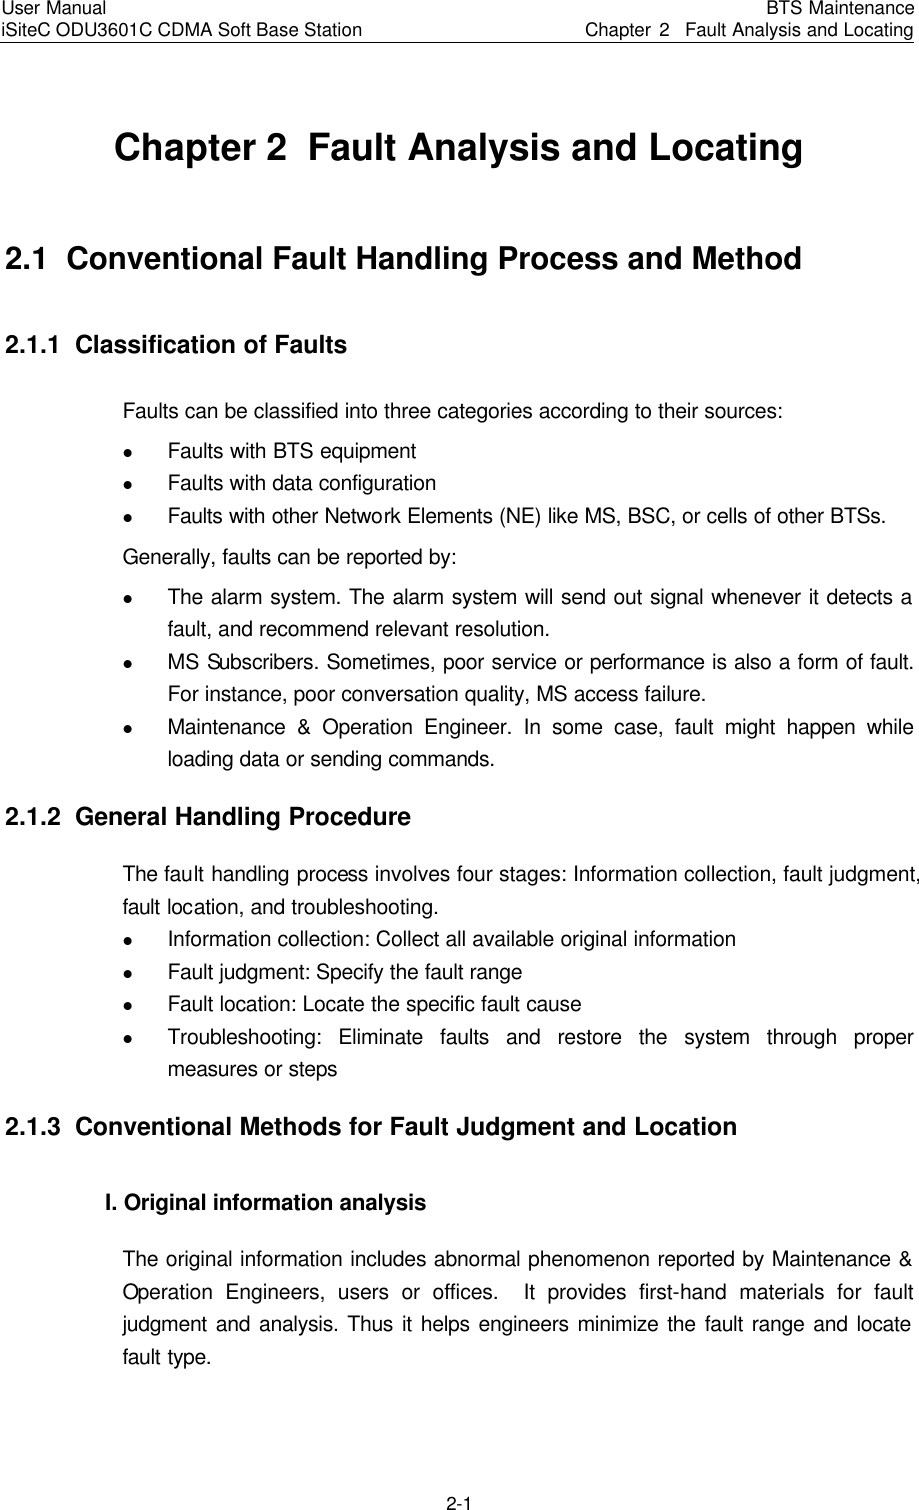 User Manual iSiteC ODU3601C CDMA Soft Base Station BTS MaintenanceChapter 2  Fault Analysis and Locating 2-1　Chapter 2  Fault Analysis and Locating 2.1  Conventional Fault Handling Process and Method　2.1.1  Classification of Faults Faults can be classified into three categories according to their sources: l Faults with BTS equipment l Faults with data configuration   l Faults with other Network Elements (NE) like MS, BSC, or cells of other BTSs. Generally, faults can be reported by: l The alarm system. The alarm system will send out signal whenever it detects a fault, and recommend relevant resolution.   l MS Subscribers. Sometimes, poor service or performance is also a form of fault. For instance, poor conversation quality, MS access failure. l Maintenance &amp; Operation Engineer. In some case, fault might happen while loading data or sending commands. 2.1.2  General Handling Procedure The fault handling process involves four stages: Information collection, fault judgment, fault location, and troubleshooting.   l Information collection: Collect all available original information l Fault judgment: Specify the fault range l Fault location: Locate the specific fault cause l Troubleshooting: Eliminate faults and restore the system through proper measures or steps 2.1.3  Conventional Methods for Fault Judgment and Location I. Original information analysis　The original information includes abnormal phenomenon reported by Maintenance &amp; Operation Engineers, users or offices.  It provides first-hand materials for fault judgment and analysis. Thus it helps engineers minimize the fault range and locate fault type. 